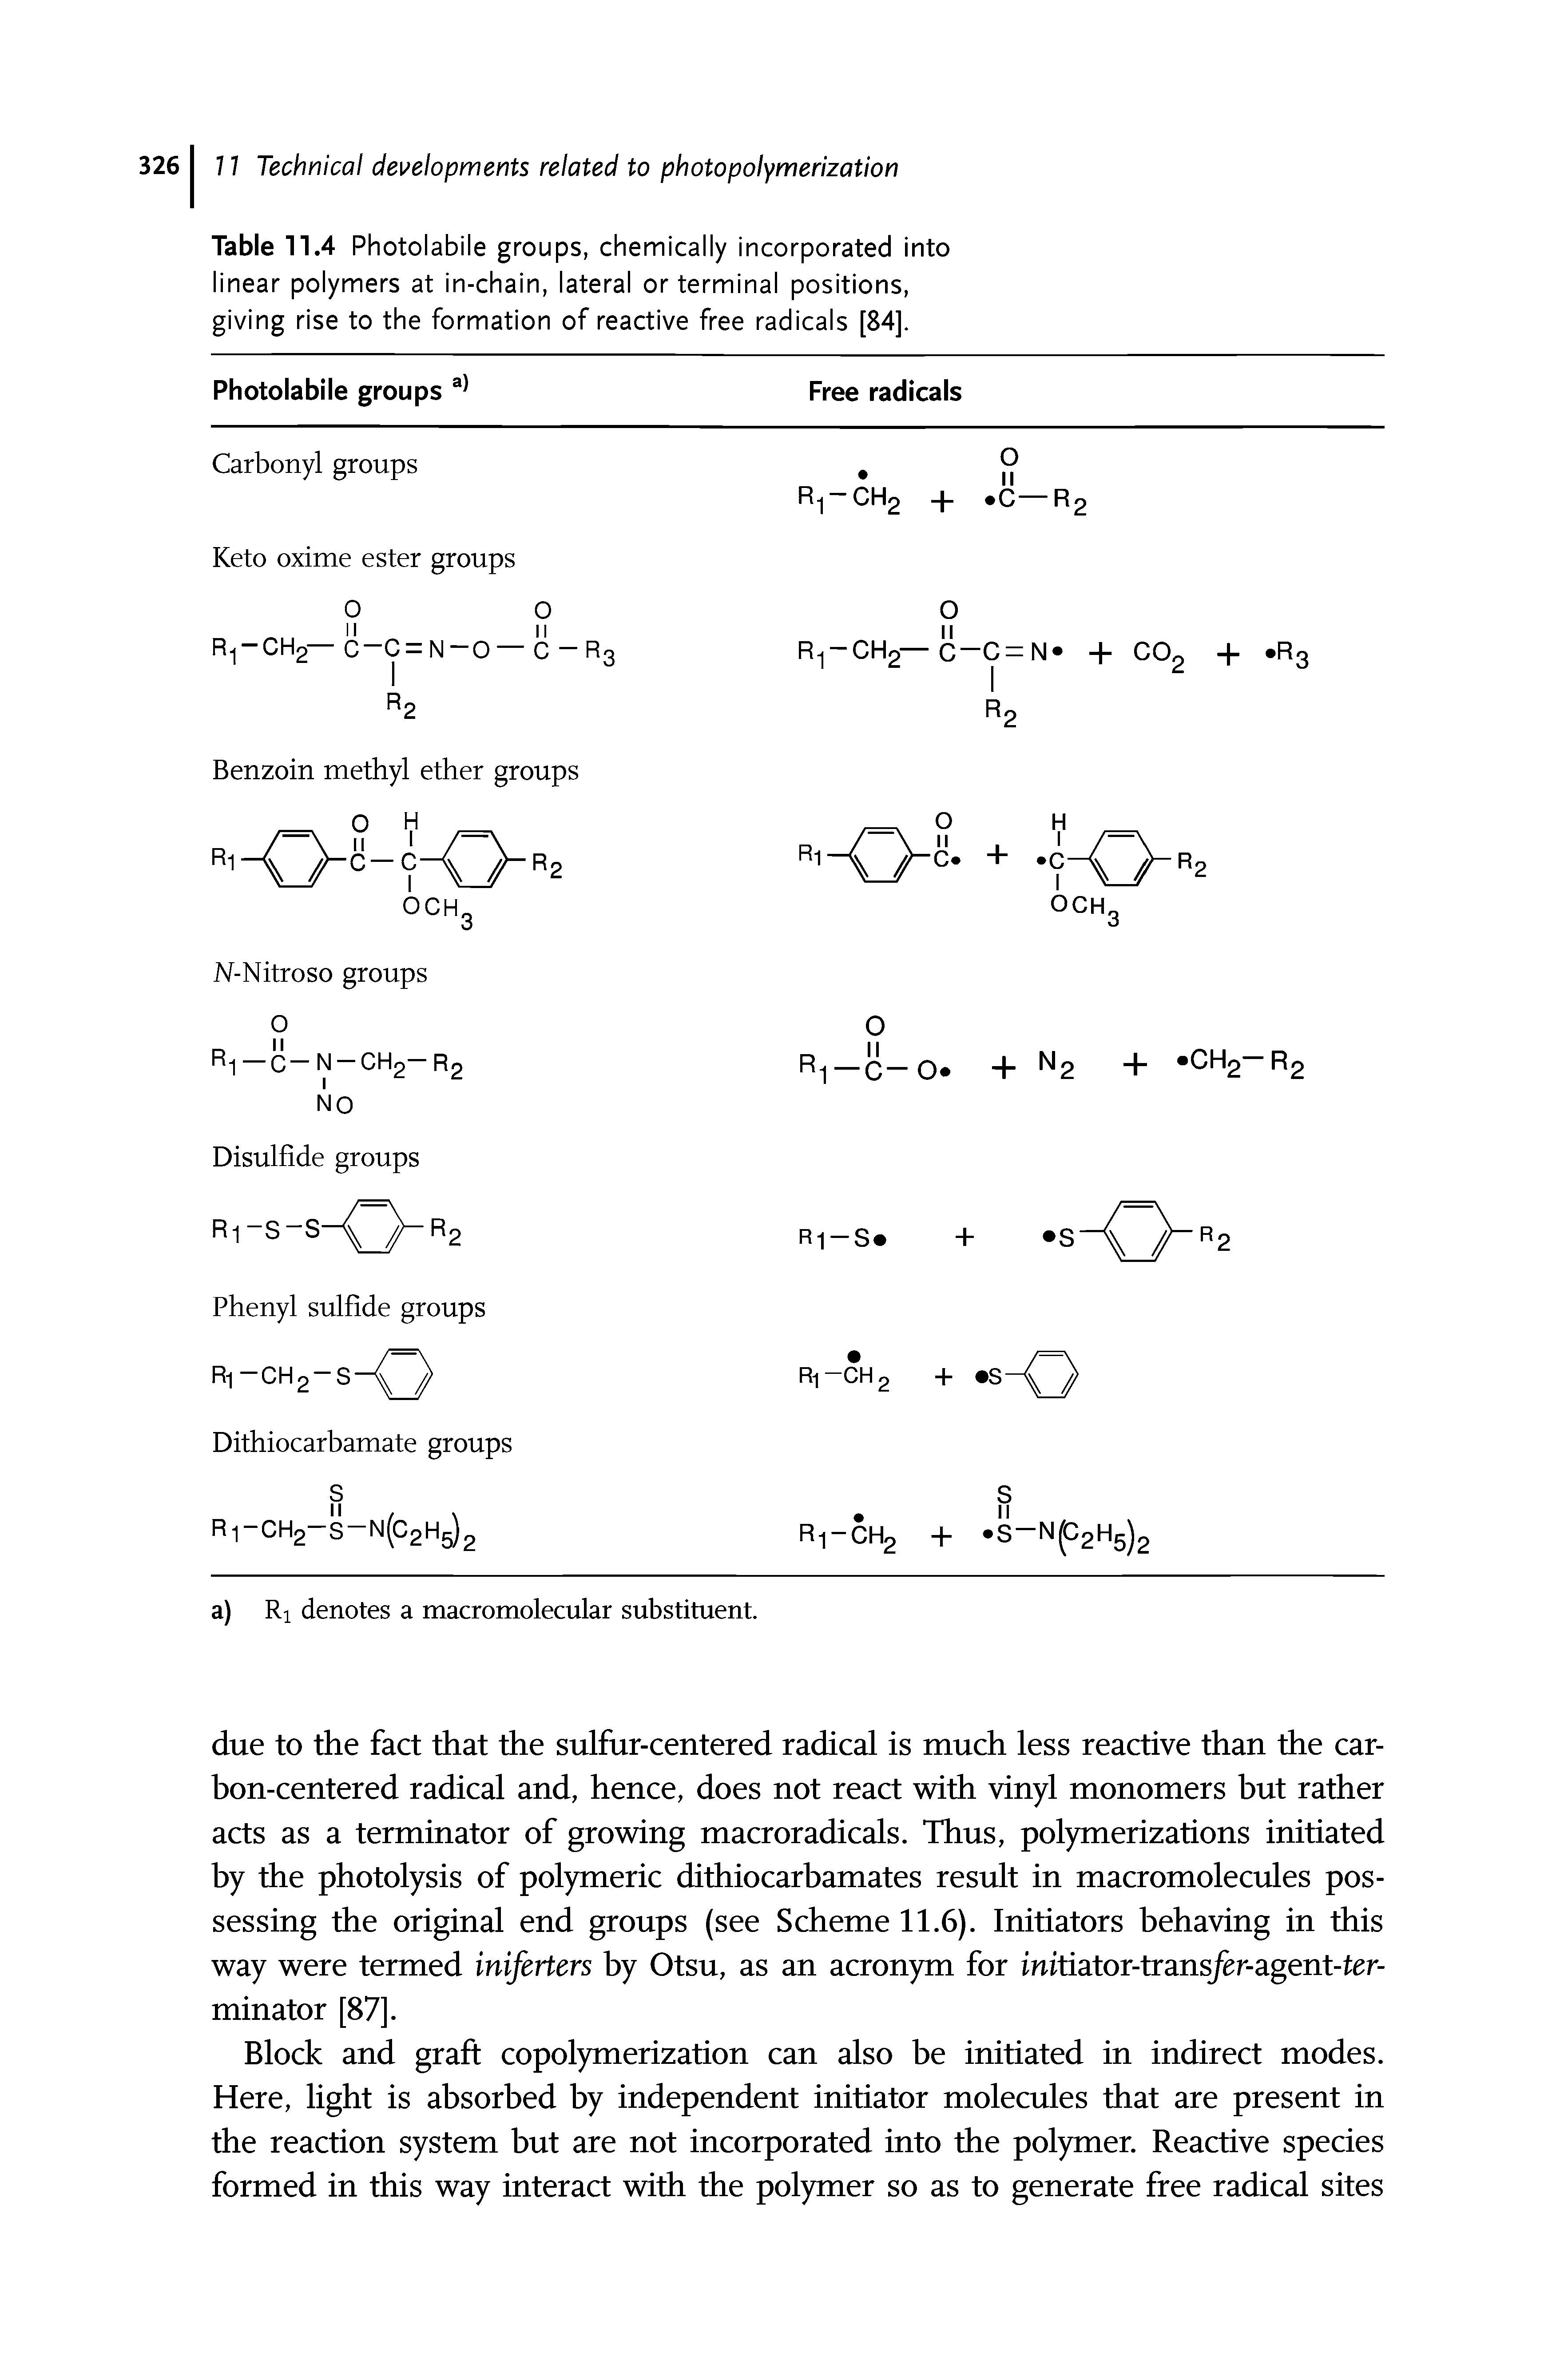 Table 11.4 Photolabile groups, chemically incorporated into linear polymers at in-chain, lateral or terminal positions, giving rise to the formation of reactive free radicals [84].